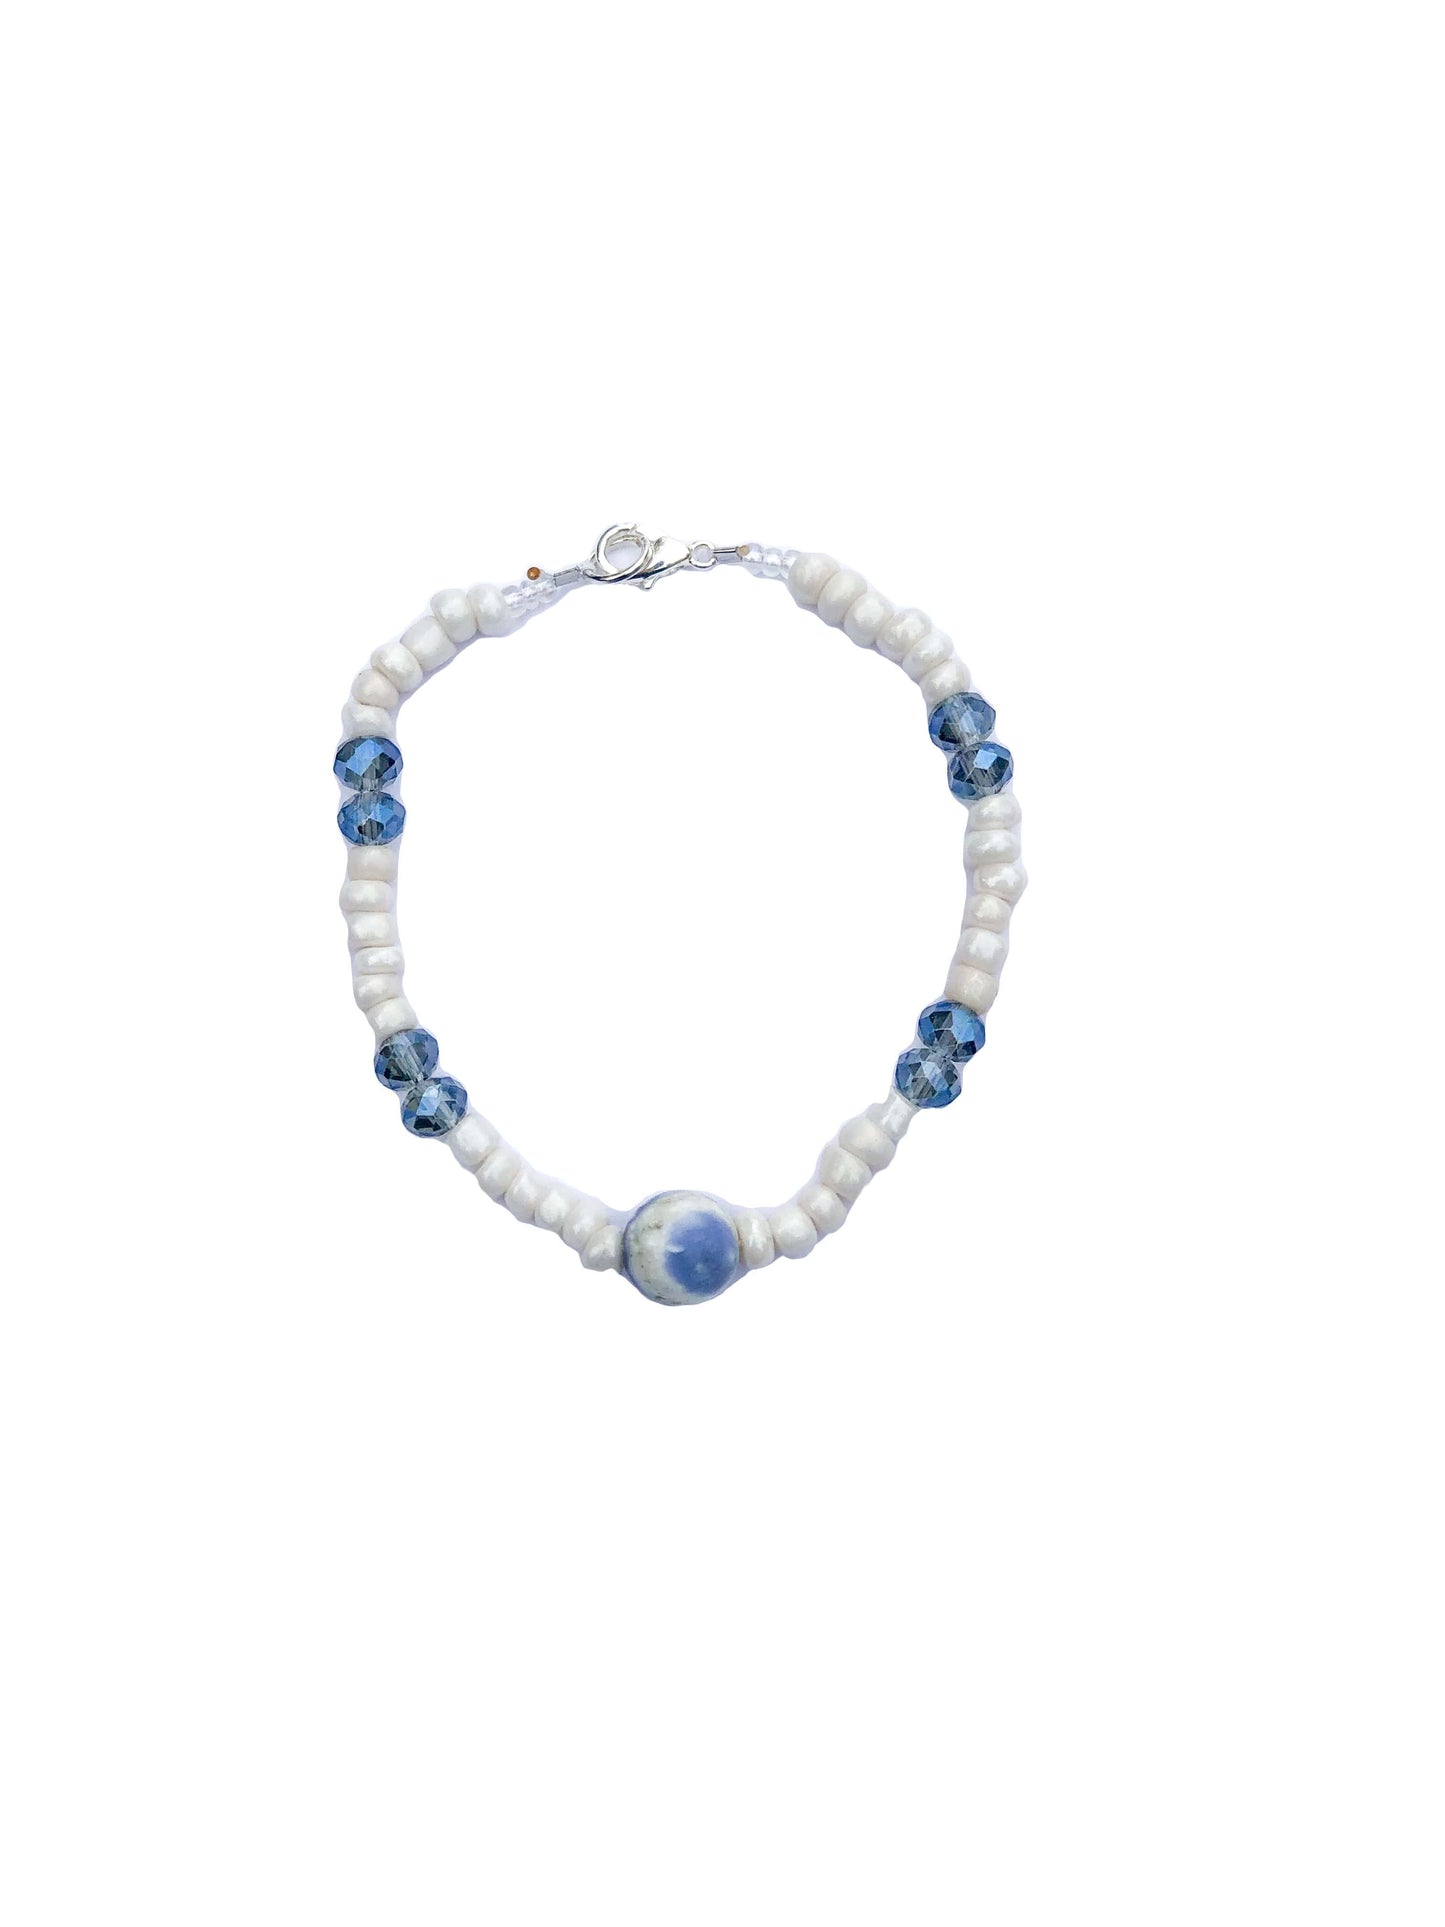 white and blue crystal beads bracelet with a marble like center piece